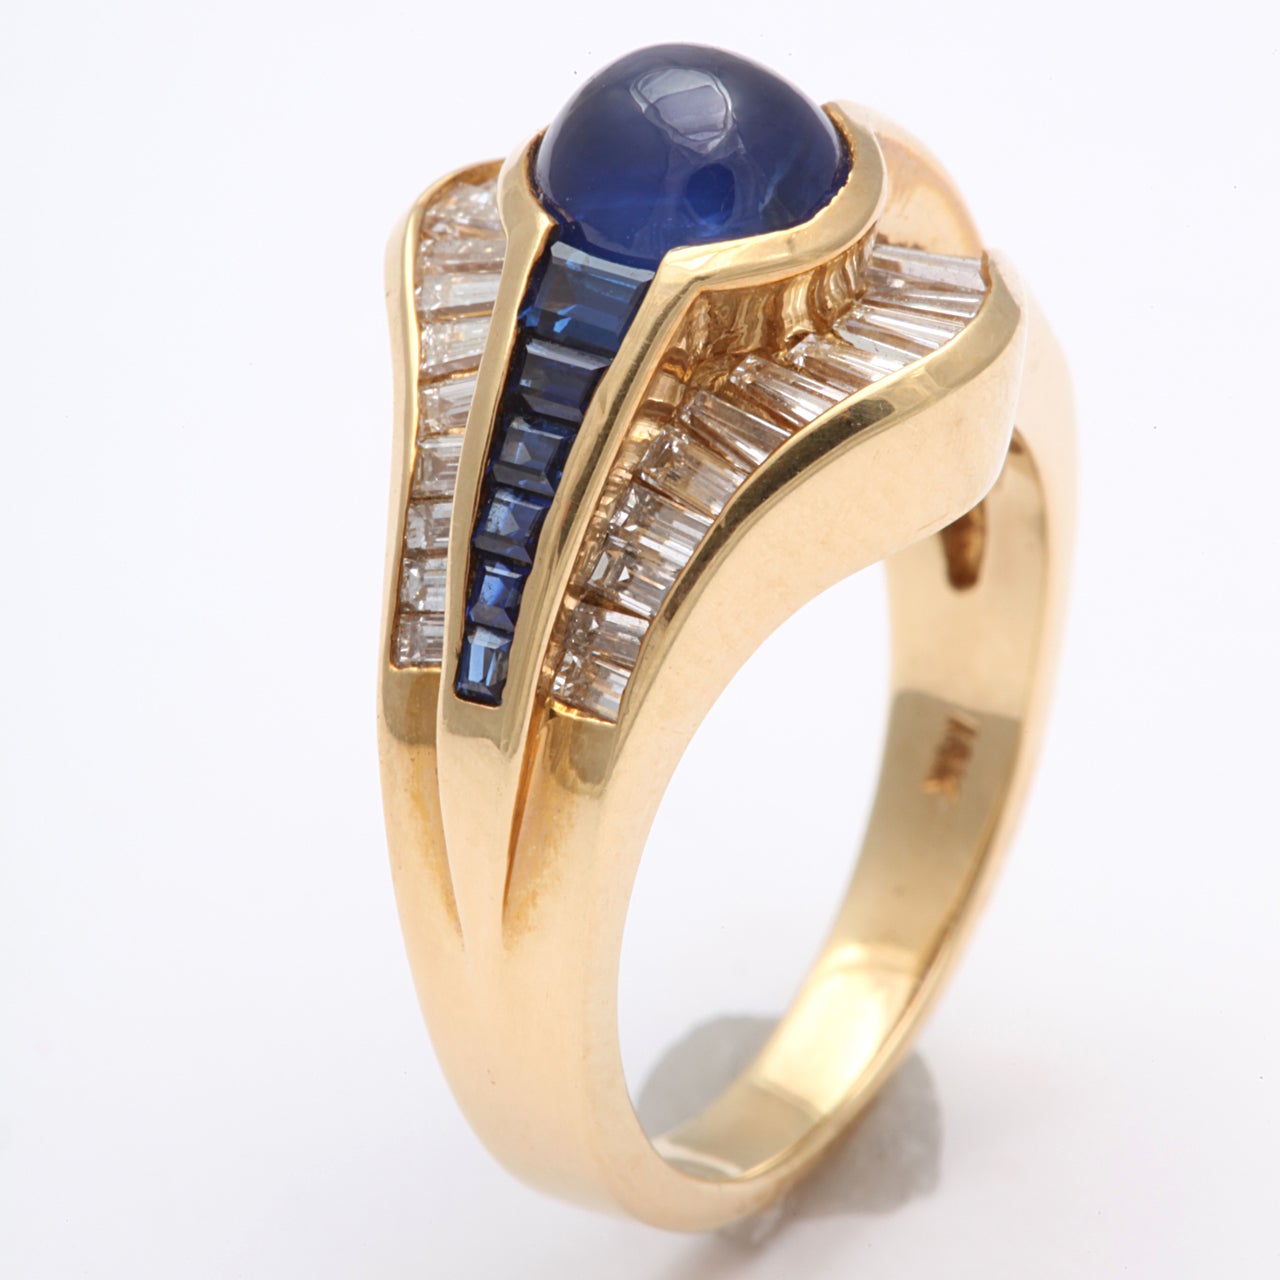 Super elegant Cabochon Sapphire Ring with tapered Channel set Sapphire Baguettes on either side and flanked by tapered Diamond Baguettes framing the Center Sapphire.  Set in 18kt Yellow Gold.